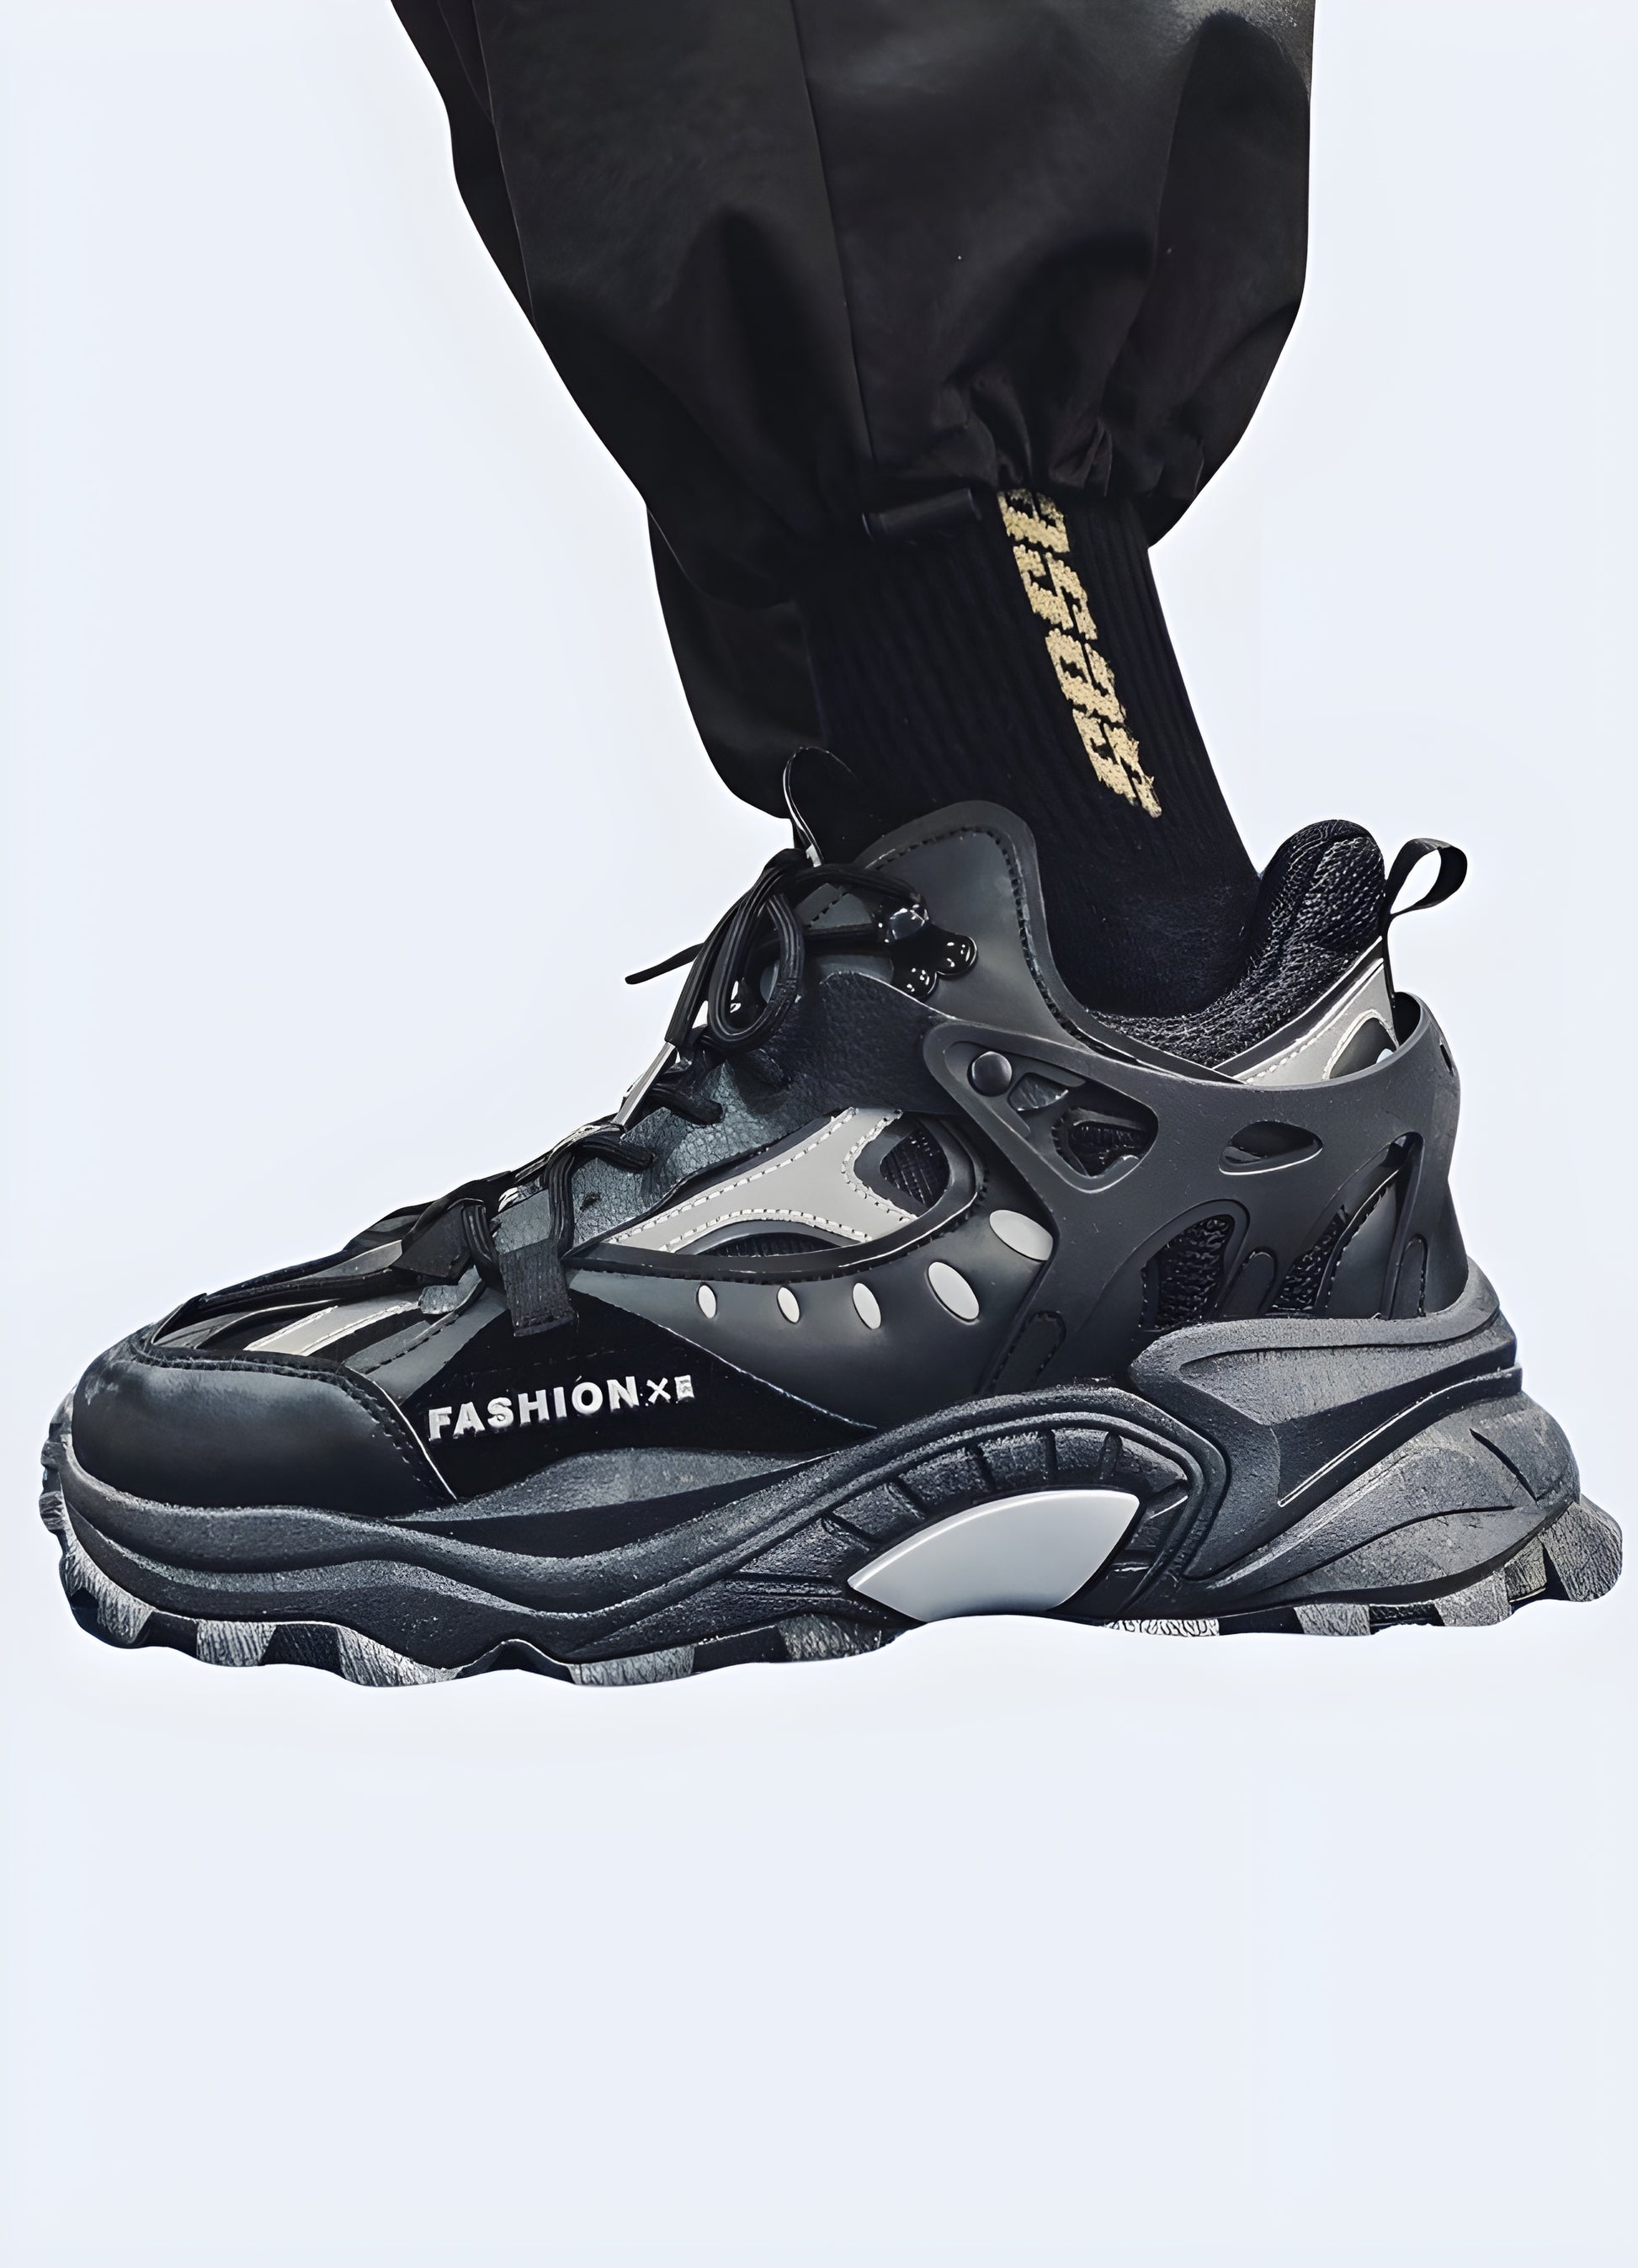 These sneakers adapt seamlessly, reinforcing your status as a trendsetter among warcore outfits.